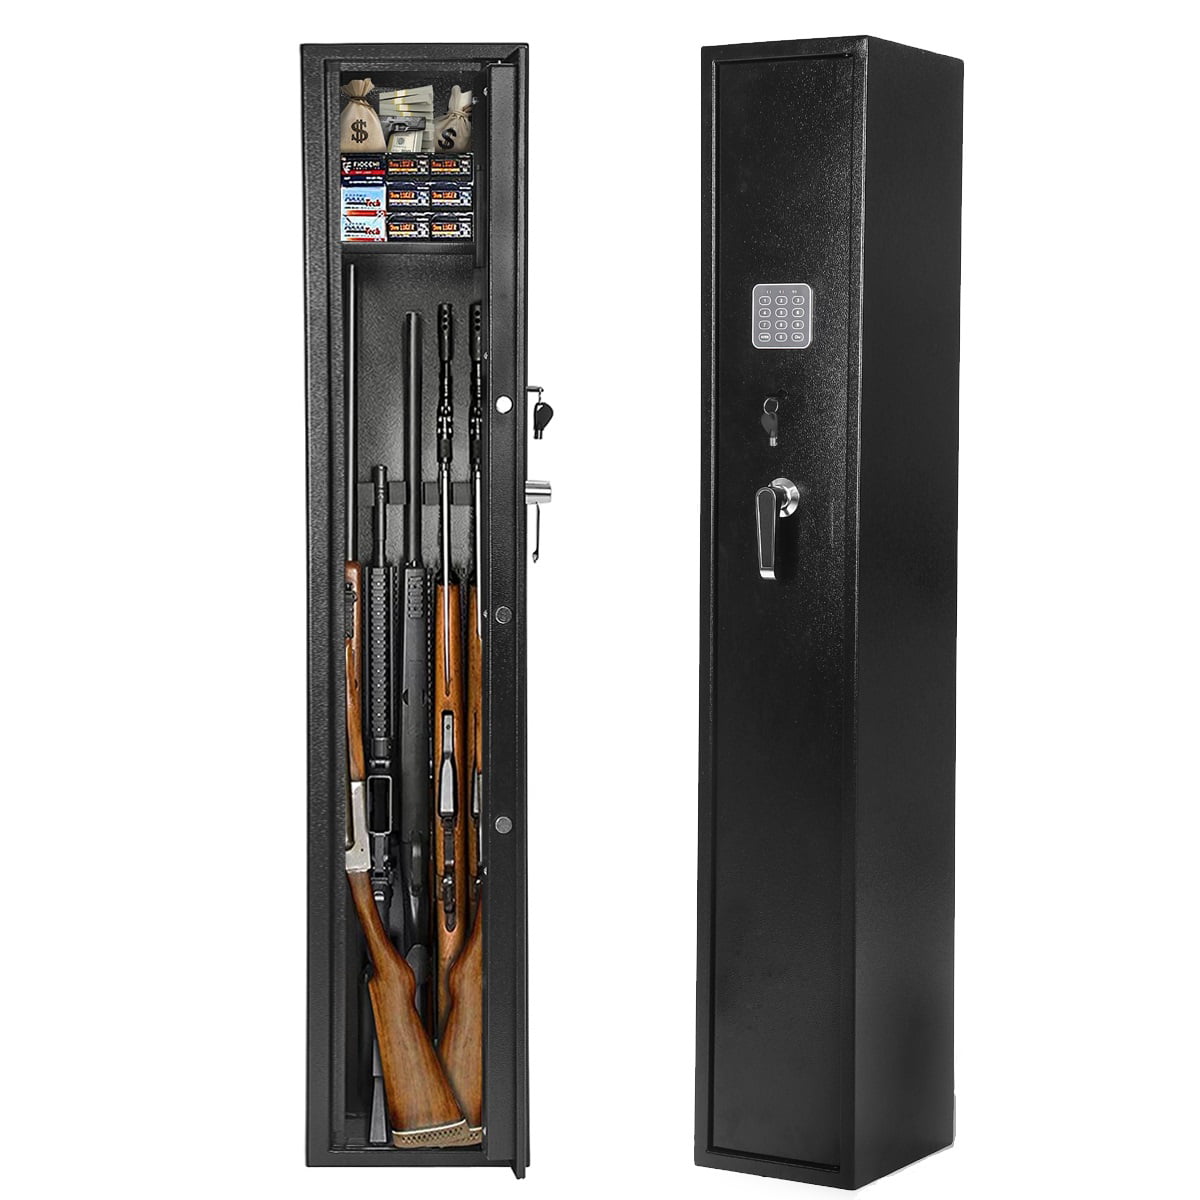 Special Designed For Rifle With Big Scope Rifle Holder Rack Inside The Gun Safe 